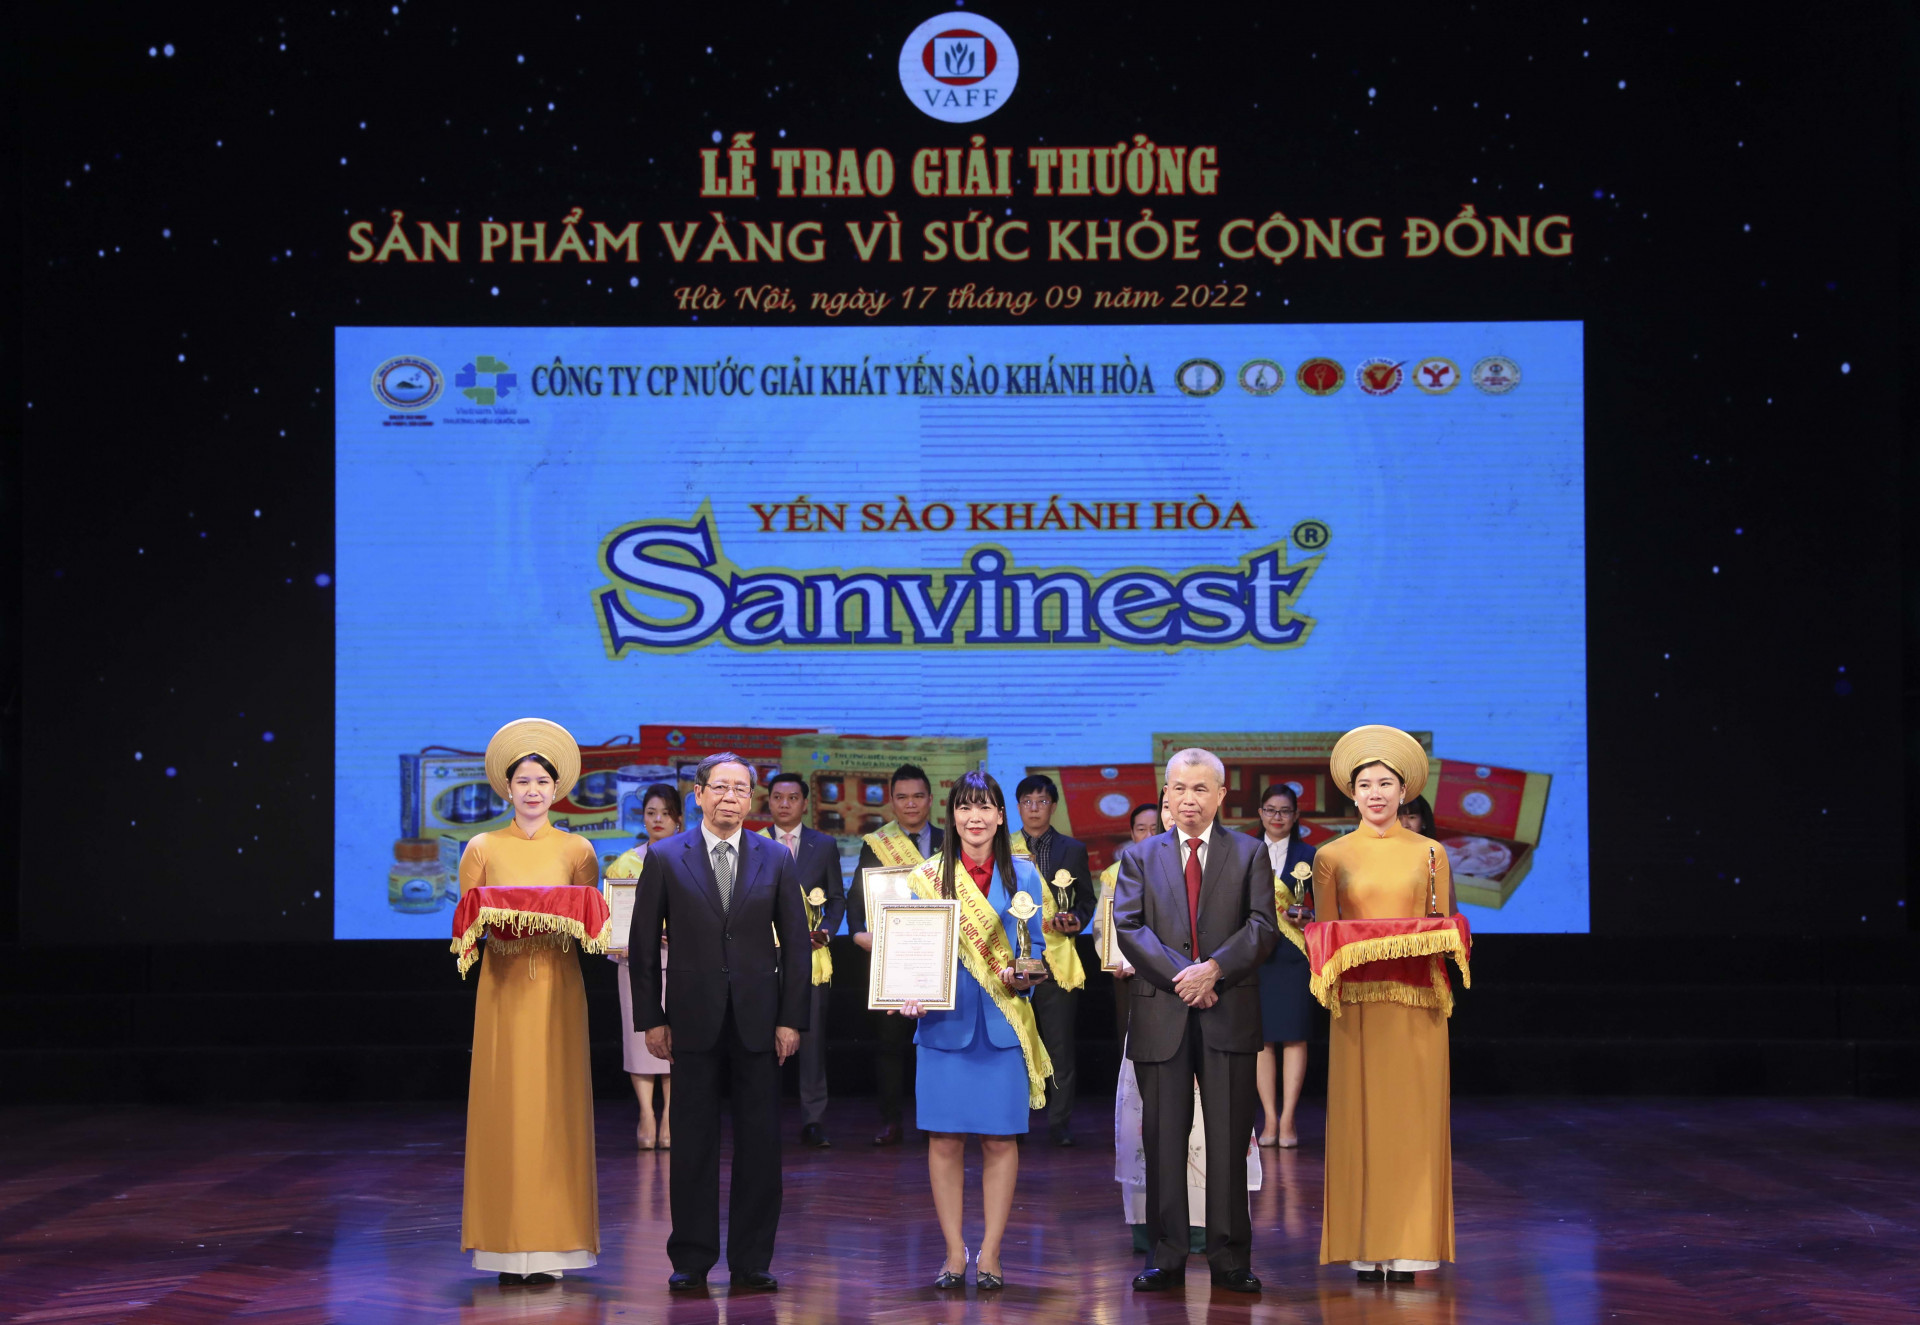 Chairman of the Board of Directors of Khanh Hoa Salanganes Chairman of the Board of Directors of Khanh Hoa Salanganes Nest Soft Drink Joint Stock Company receiving the awardNest Soft Drink Joint Stock Company receiving the award